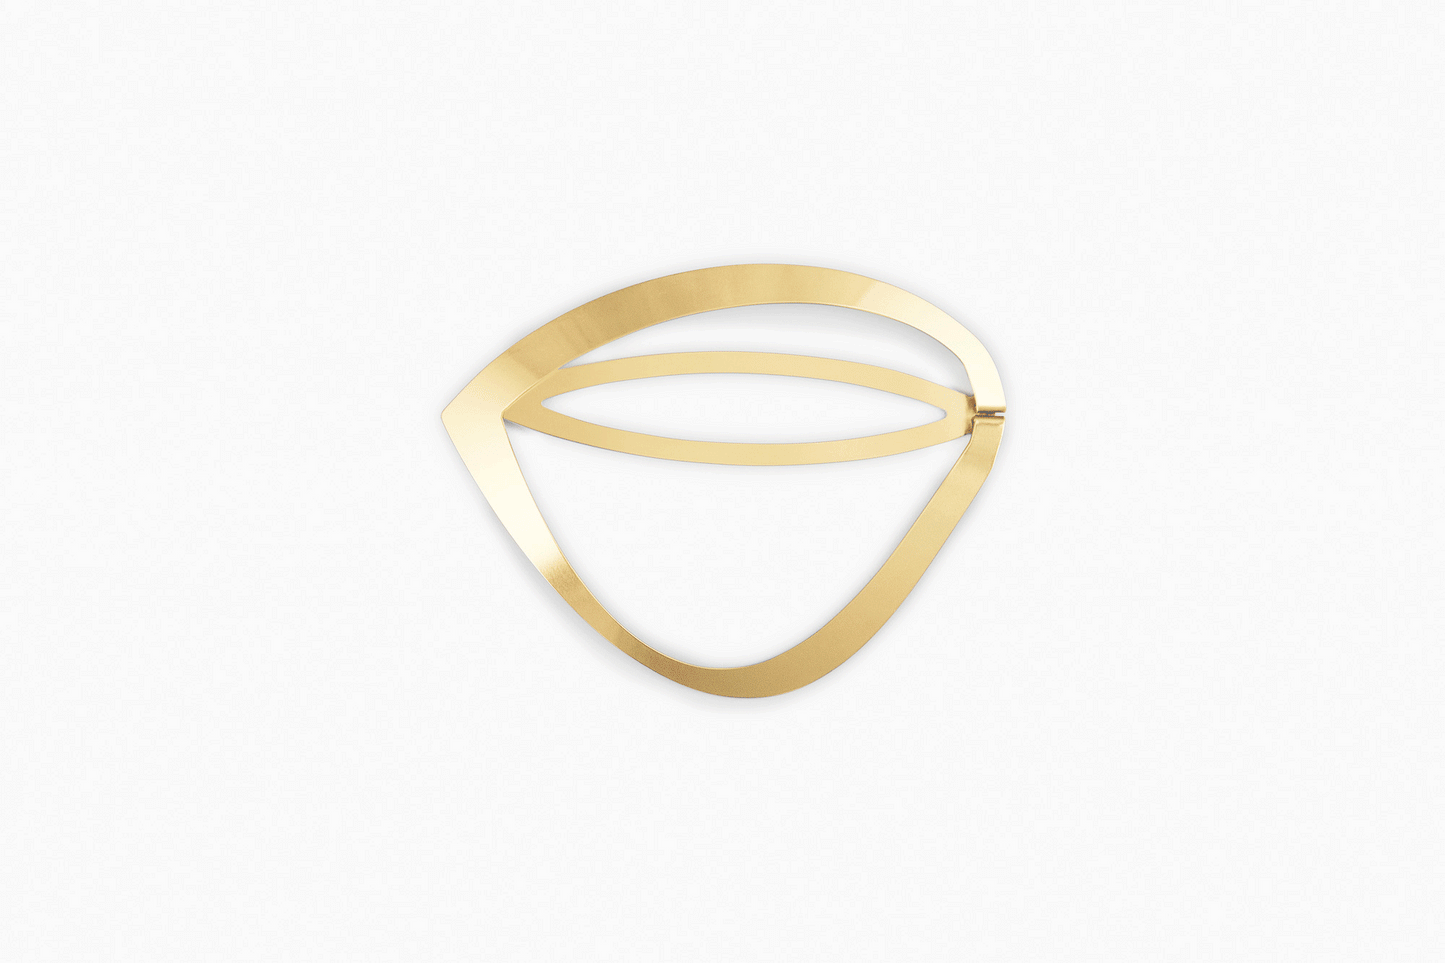 Product images of artistically shaped designer hair clip BARBARA by CLINQ. Available in silver-tone, silver-plated, gold-plated and rosegold-plated